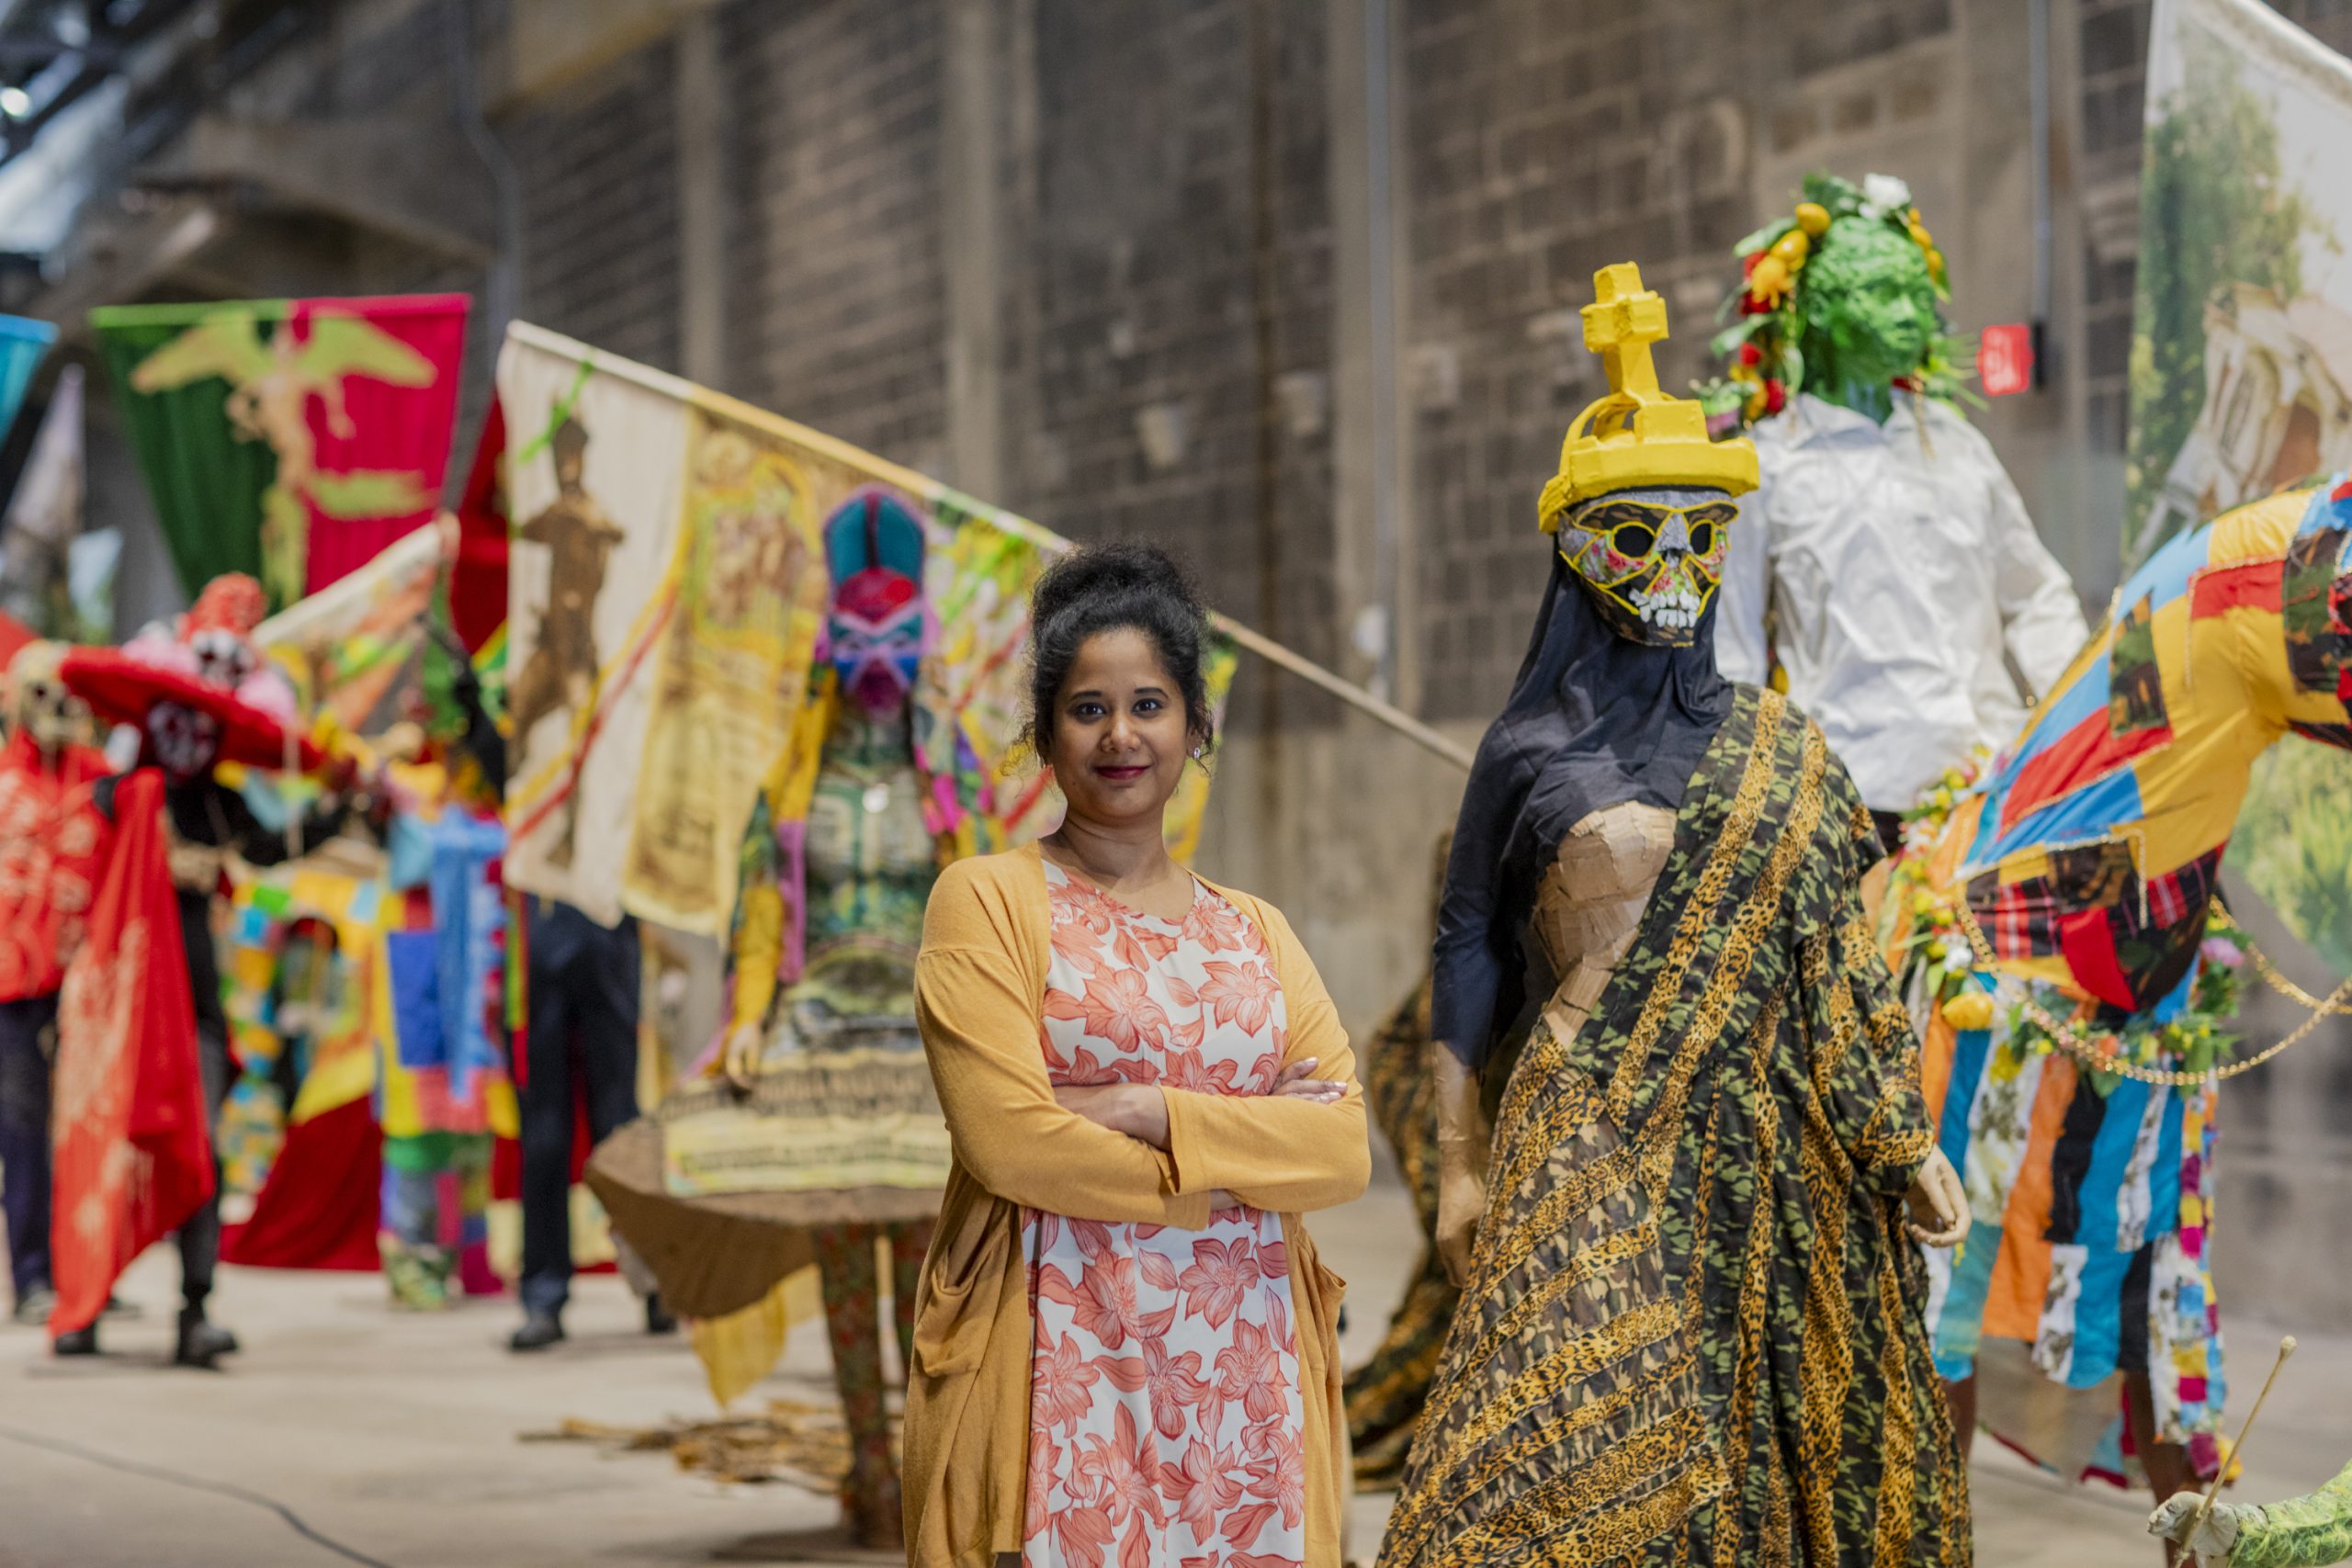 A person with medium dark skin and a black bun in front of colorful masked sculptures arranged in a procession in an industrial space